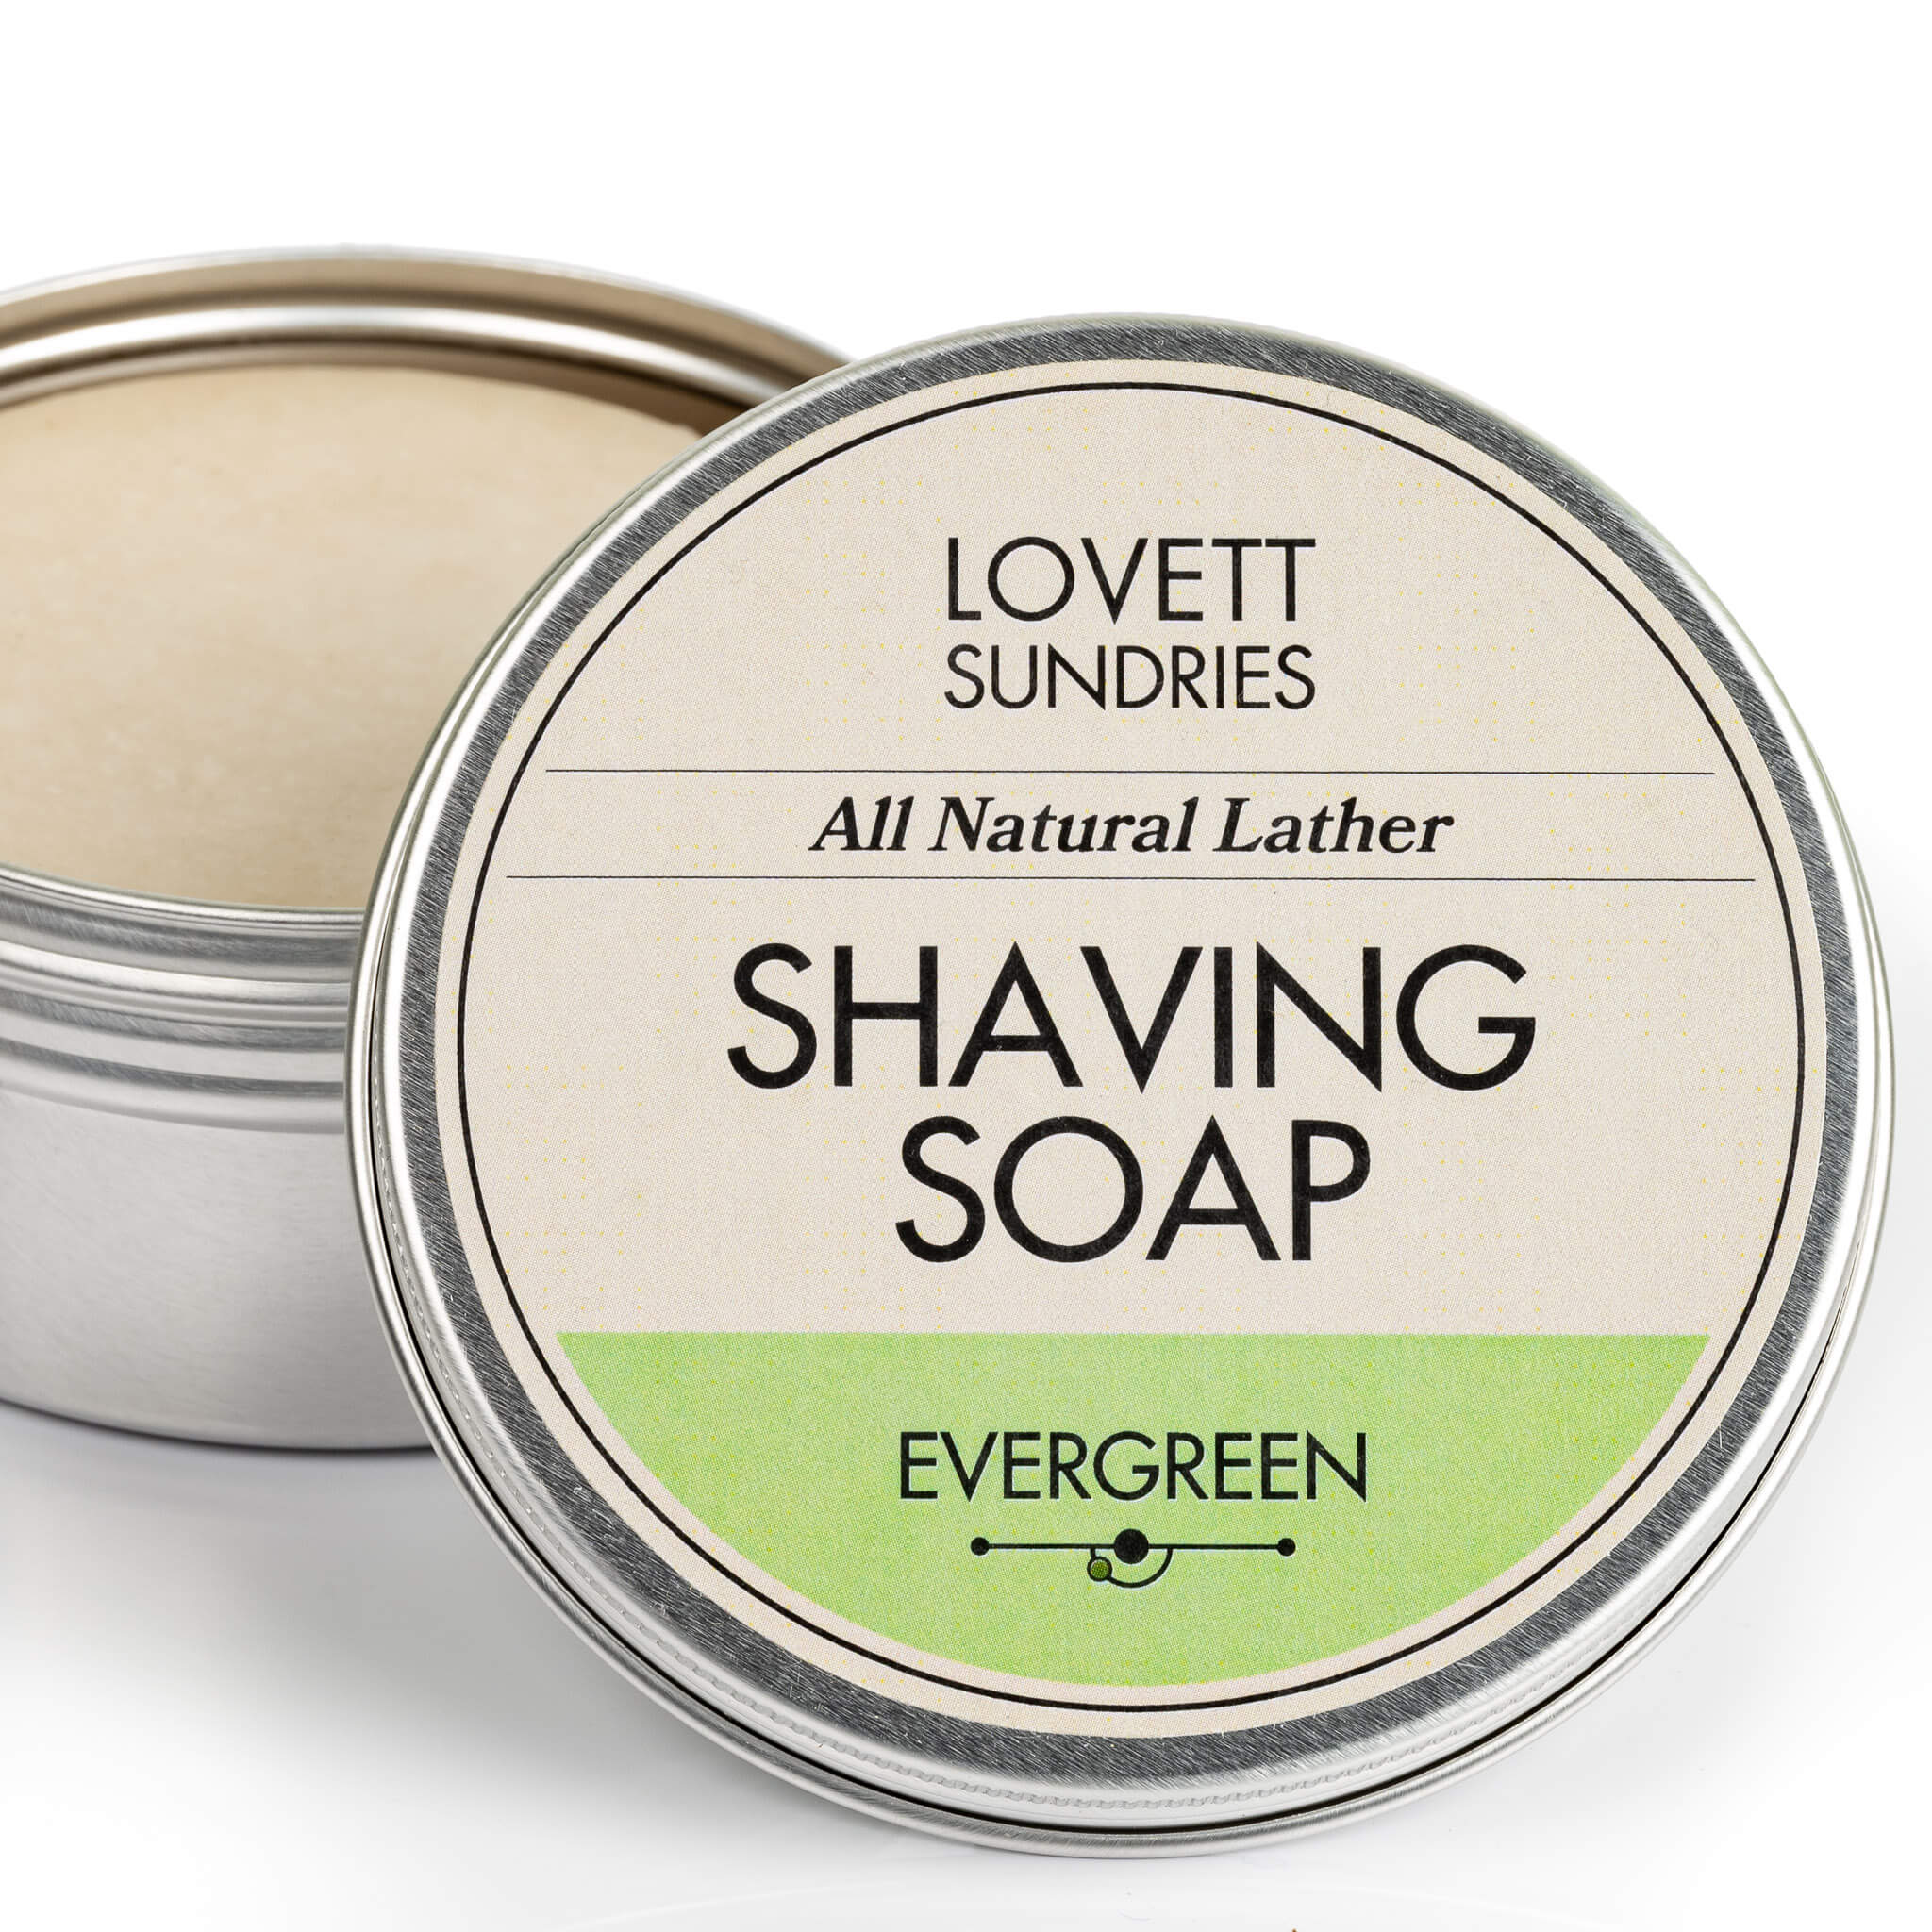 All natural good lathering evergreen scented shaving soap in a recyclable aluminum tin.